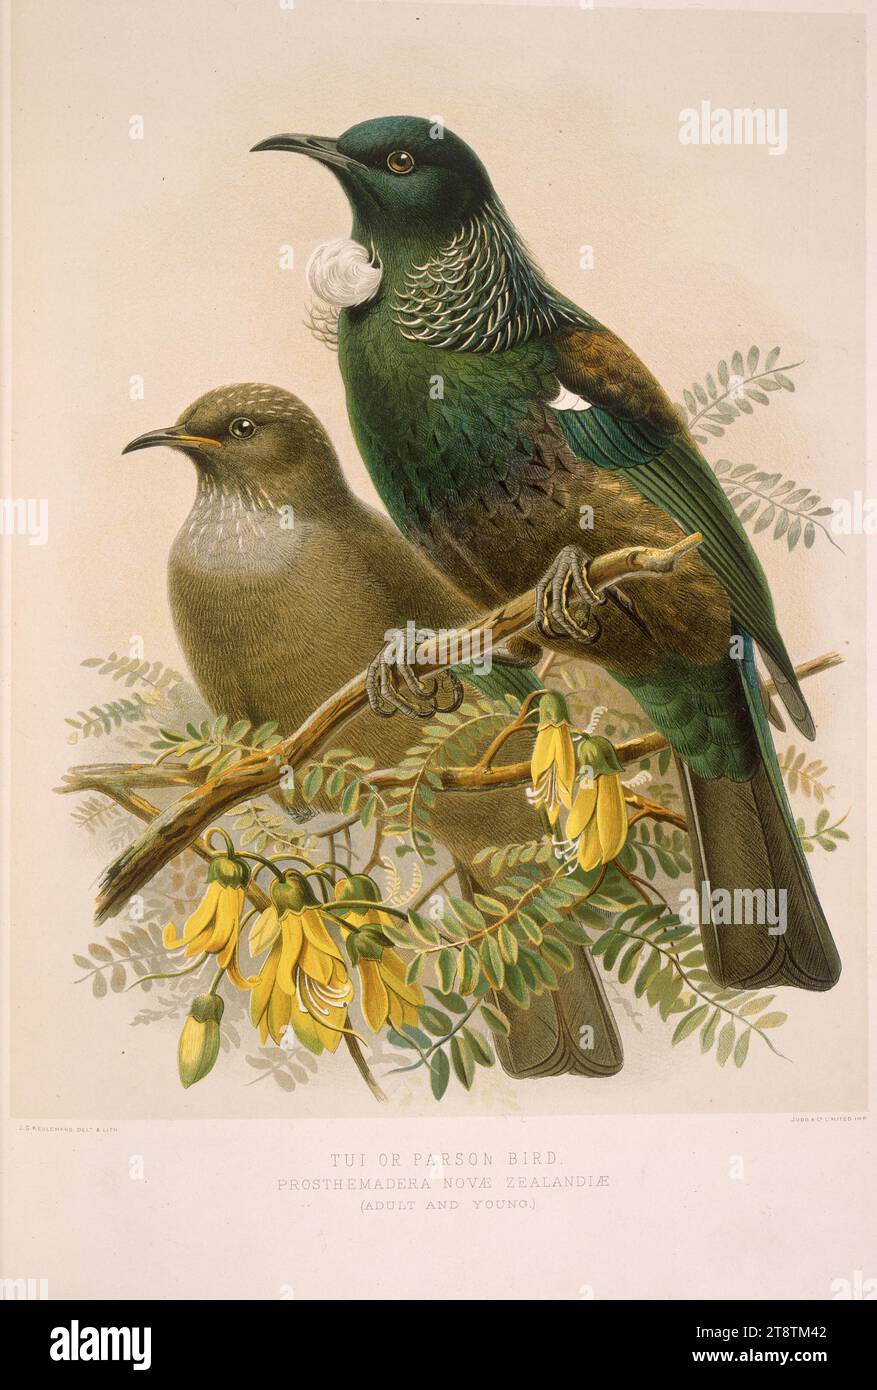 Keulemans, John Gerrard 1842-1912: Tui or Parson bird - prosthemadera novae-zealandiae (adult and young). J. G. Keulemans delt. & lith. Plate X. 1888, Shows two tui, the young on the left,the adult on the right, on Kowhai (sophora microphylla Stock Photo